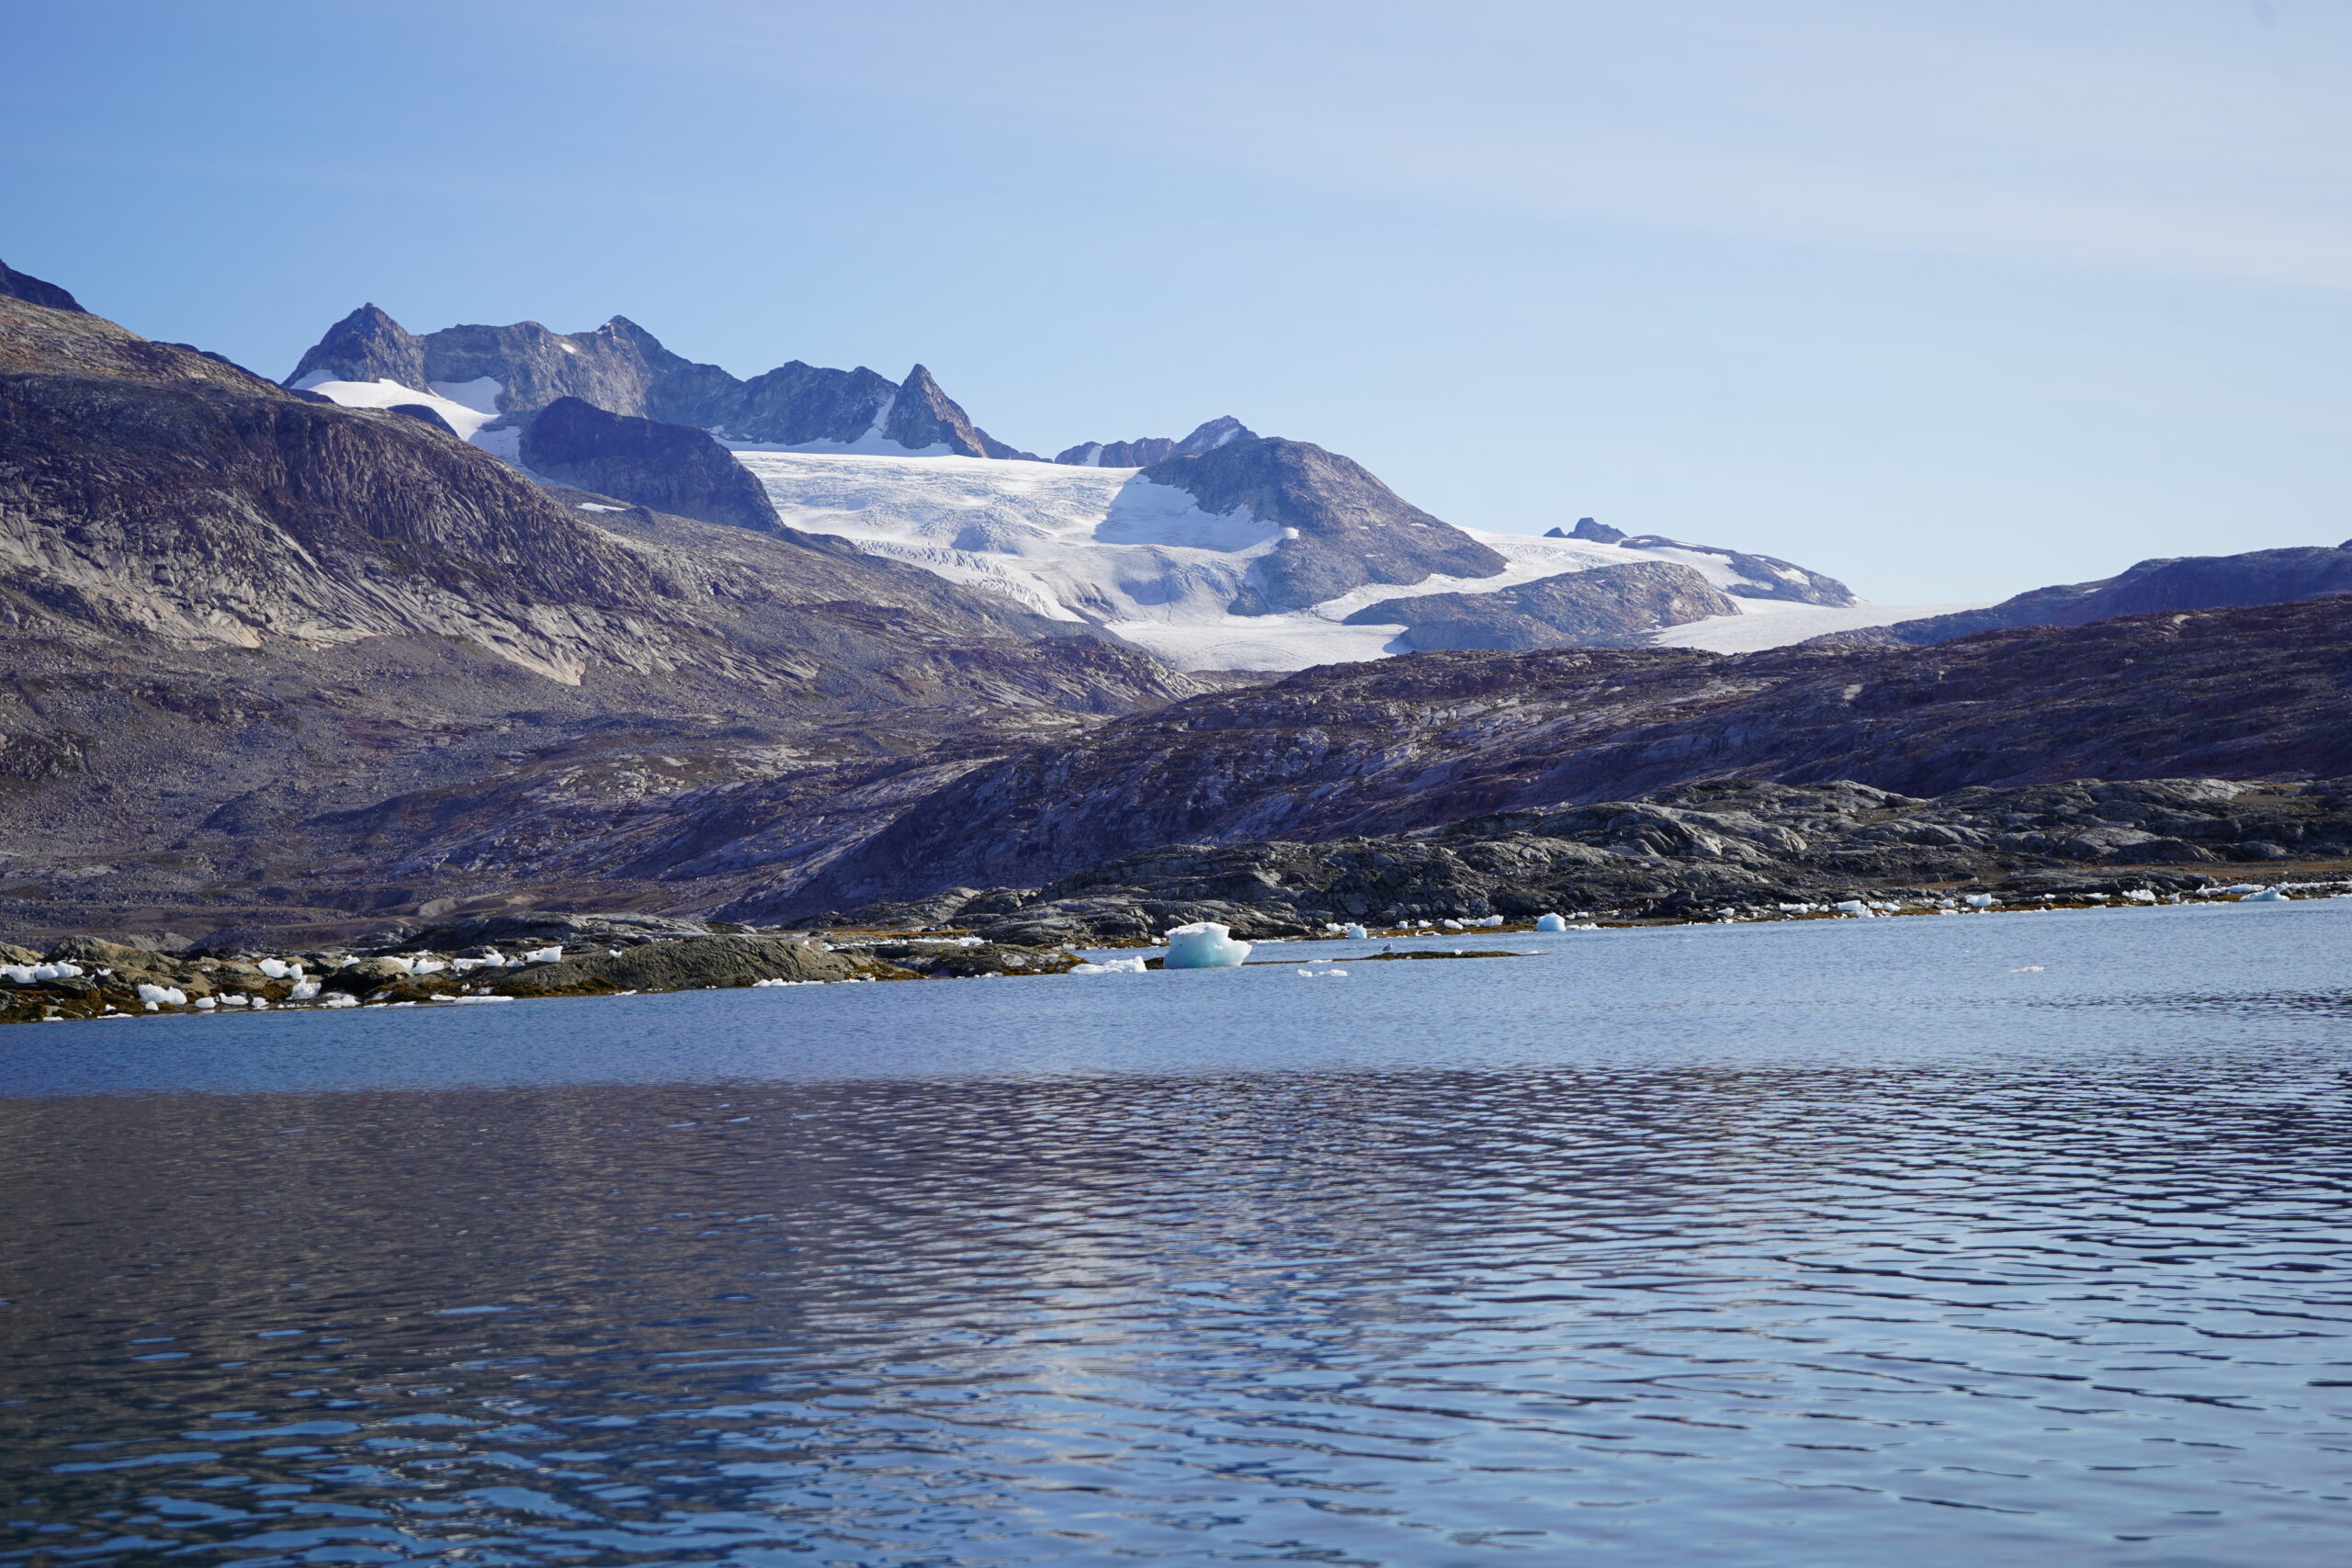 View of the glacier you cross when visiting Tiilerilaaq during winter with snowmobile or dog sled from Tasiilaq.